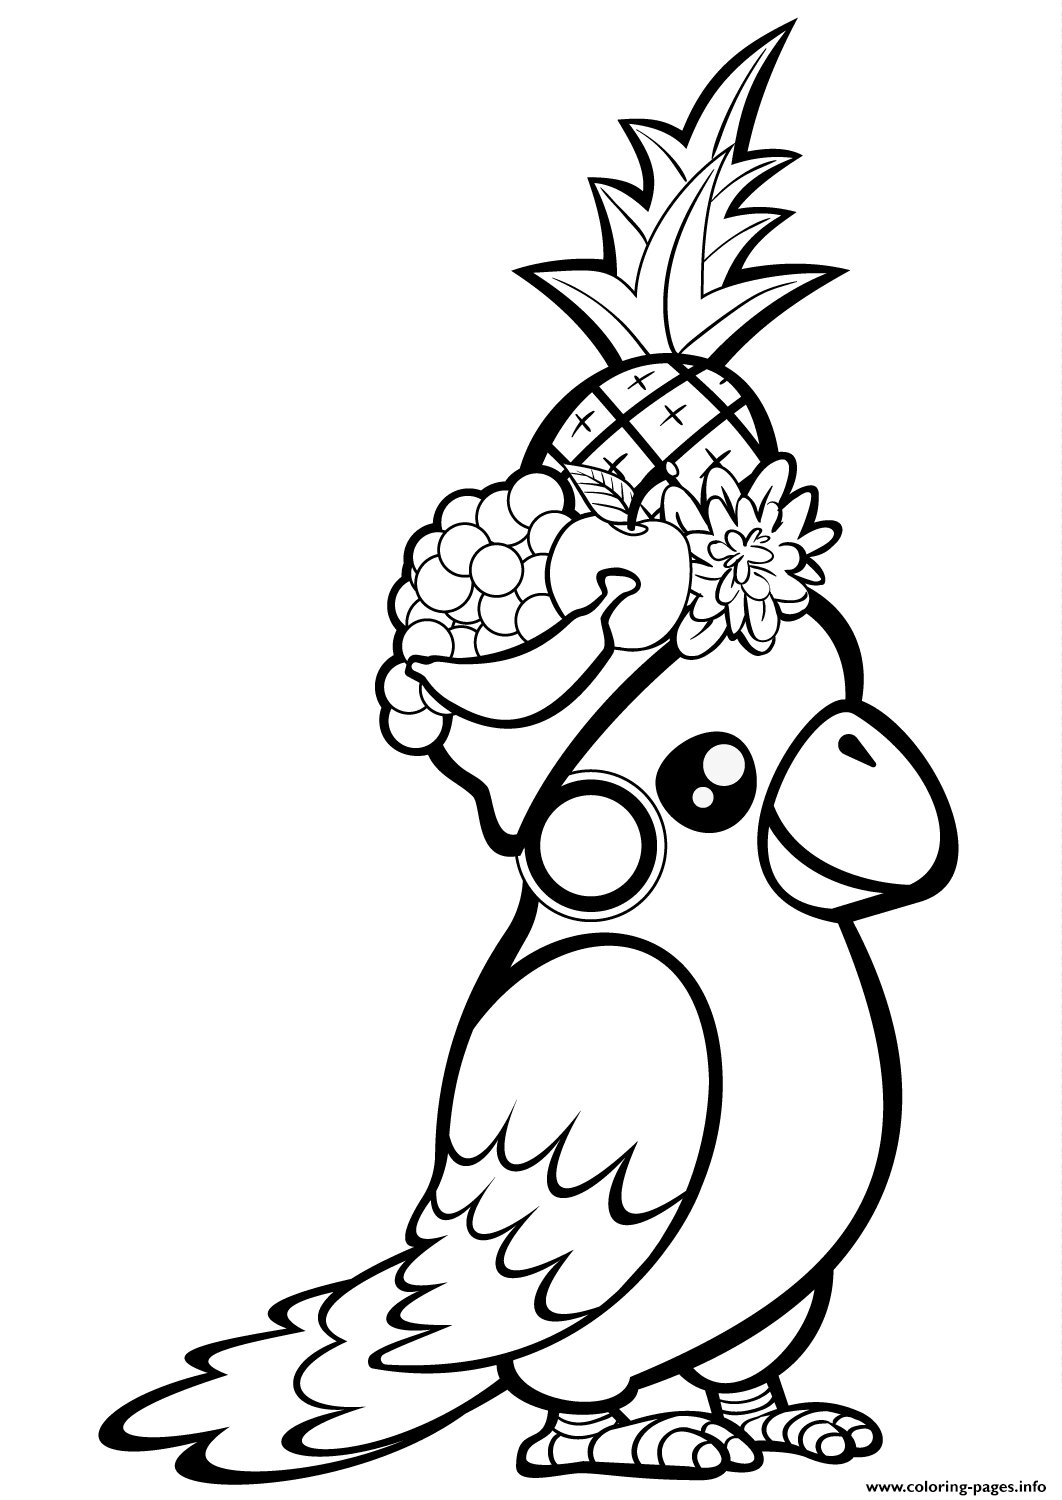 Cute Parrot With Fruit On Its Head Coloring Pages Printable